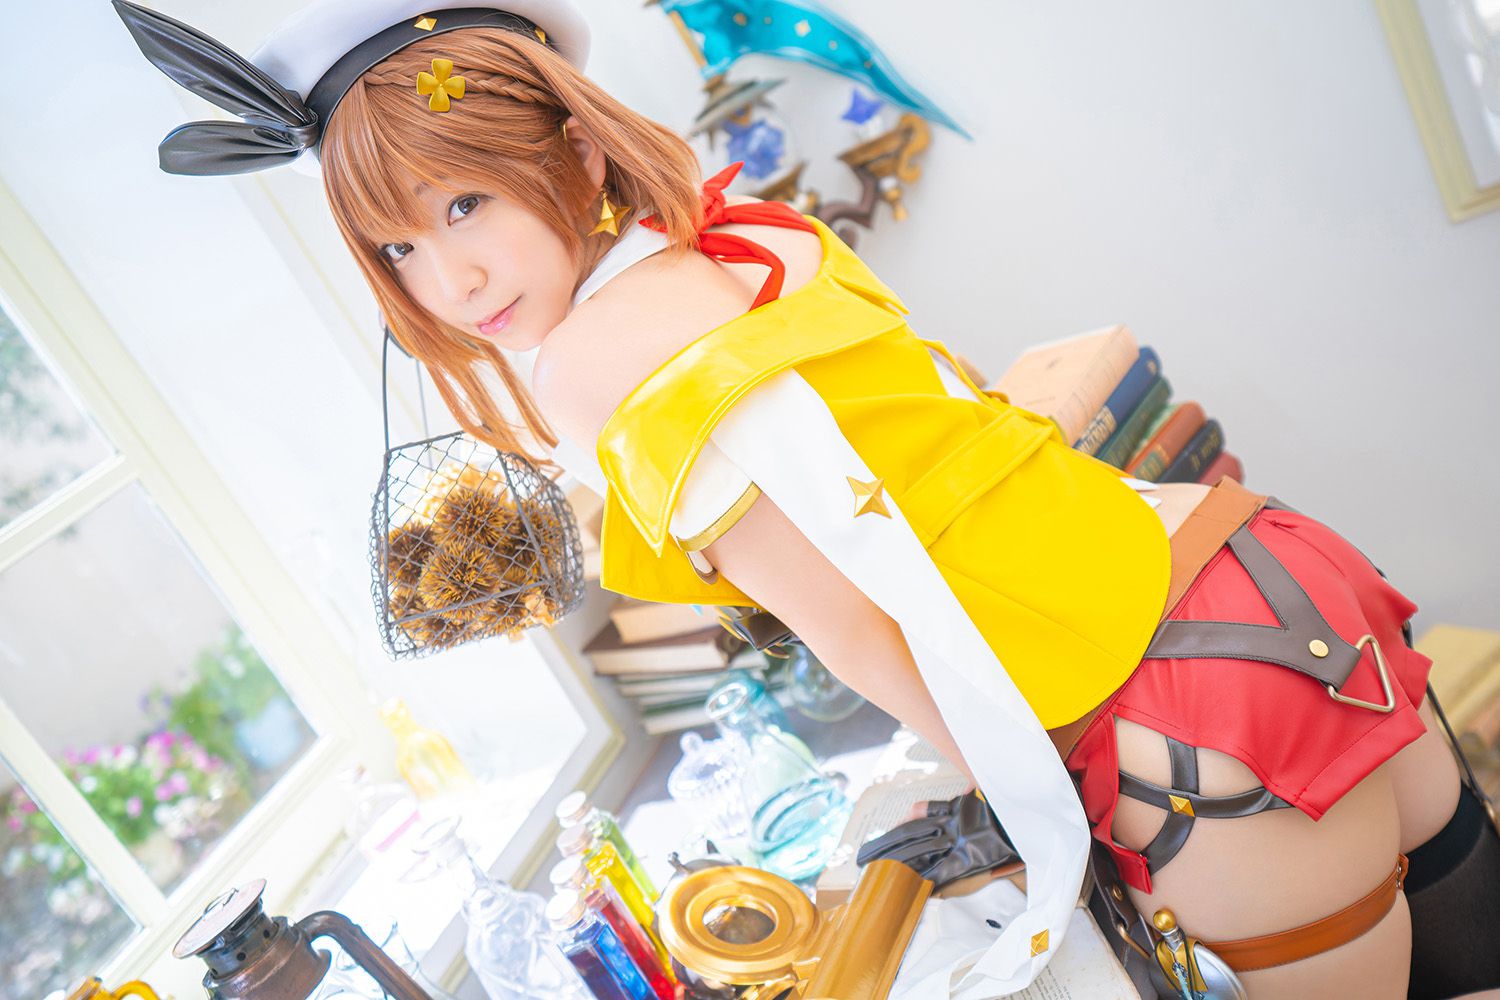 [Liza's Atelier 2] Iori Mo jacks the official site in cosplay that reproduces Liza's thighs! 15